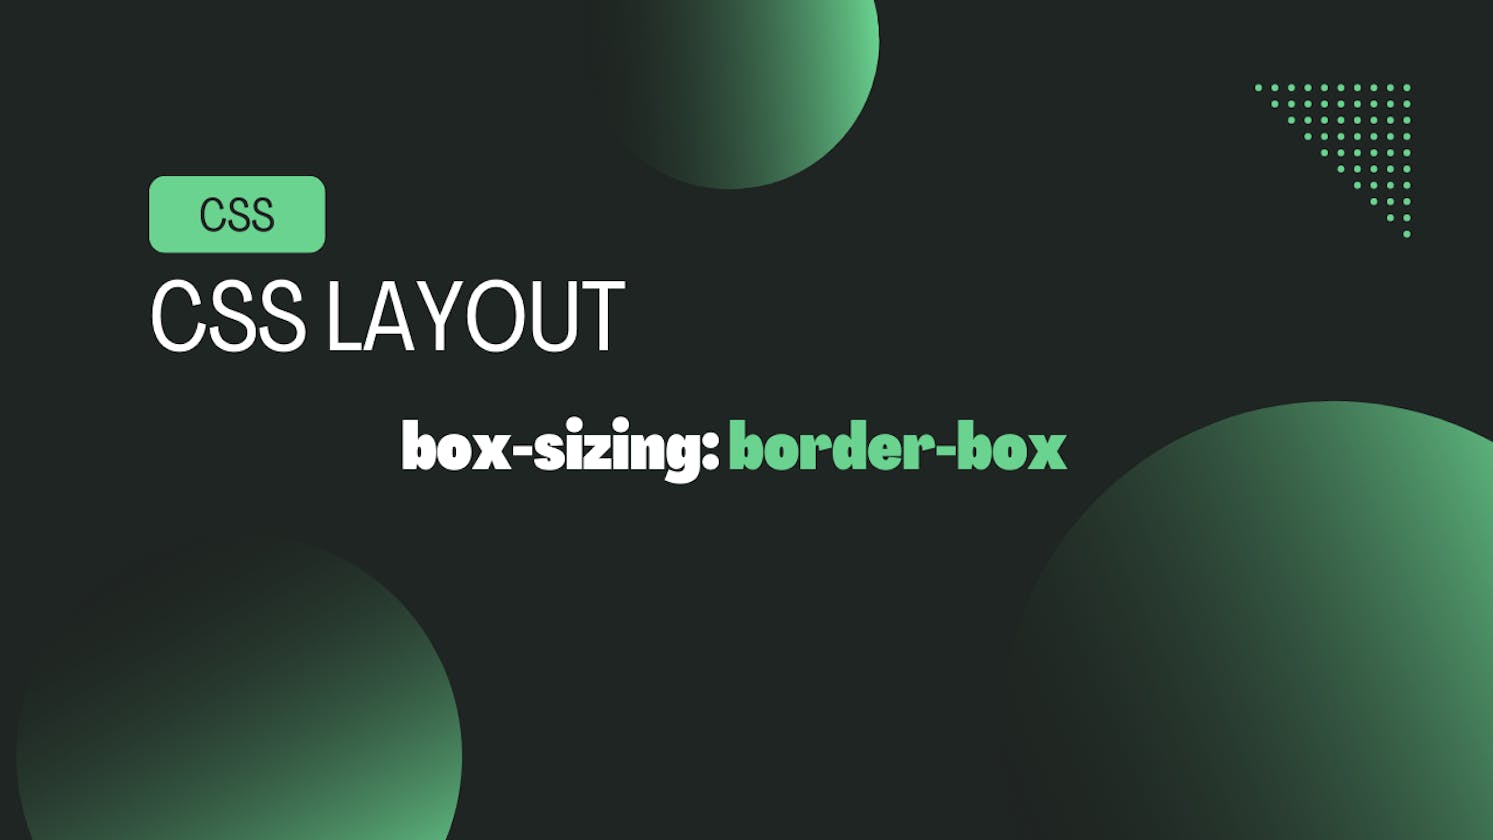 CSS layout made easy using box-sizing